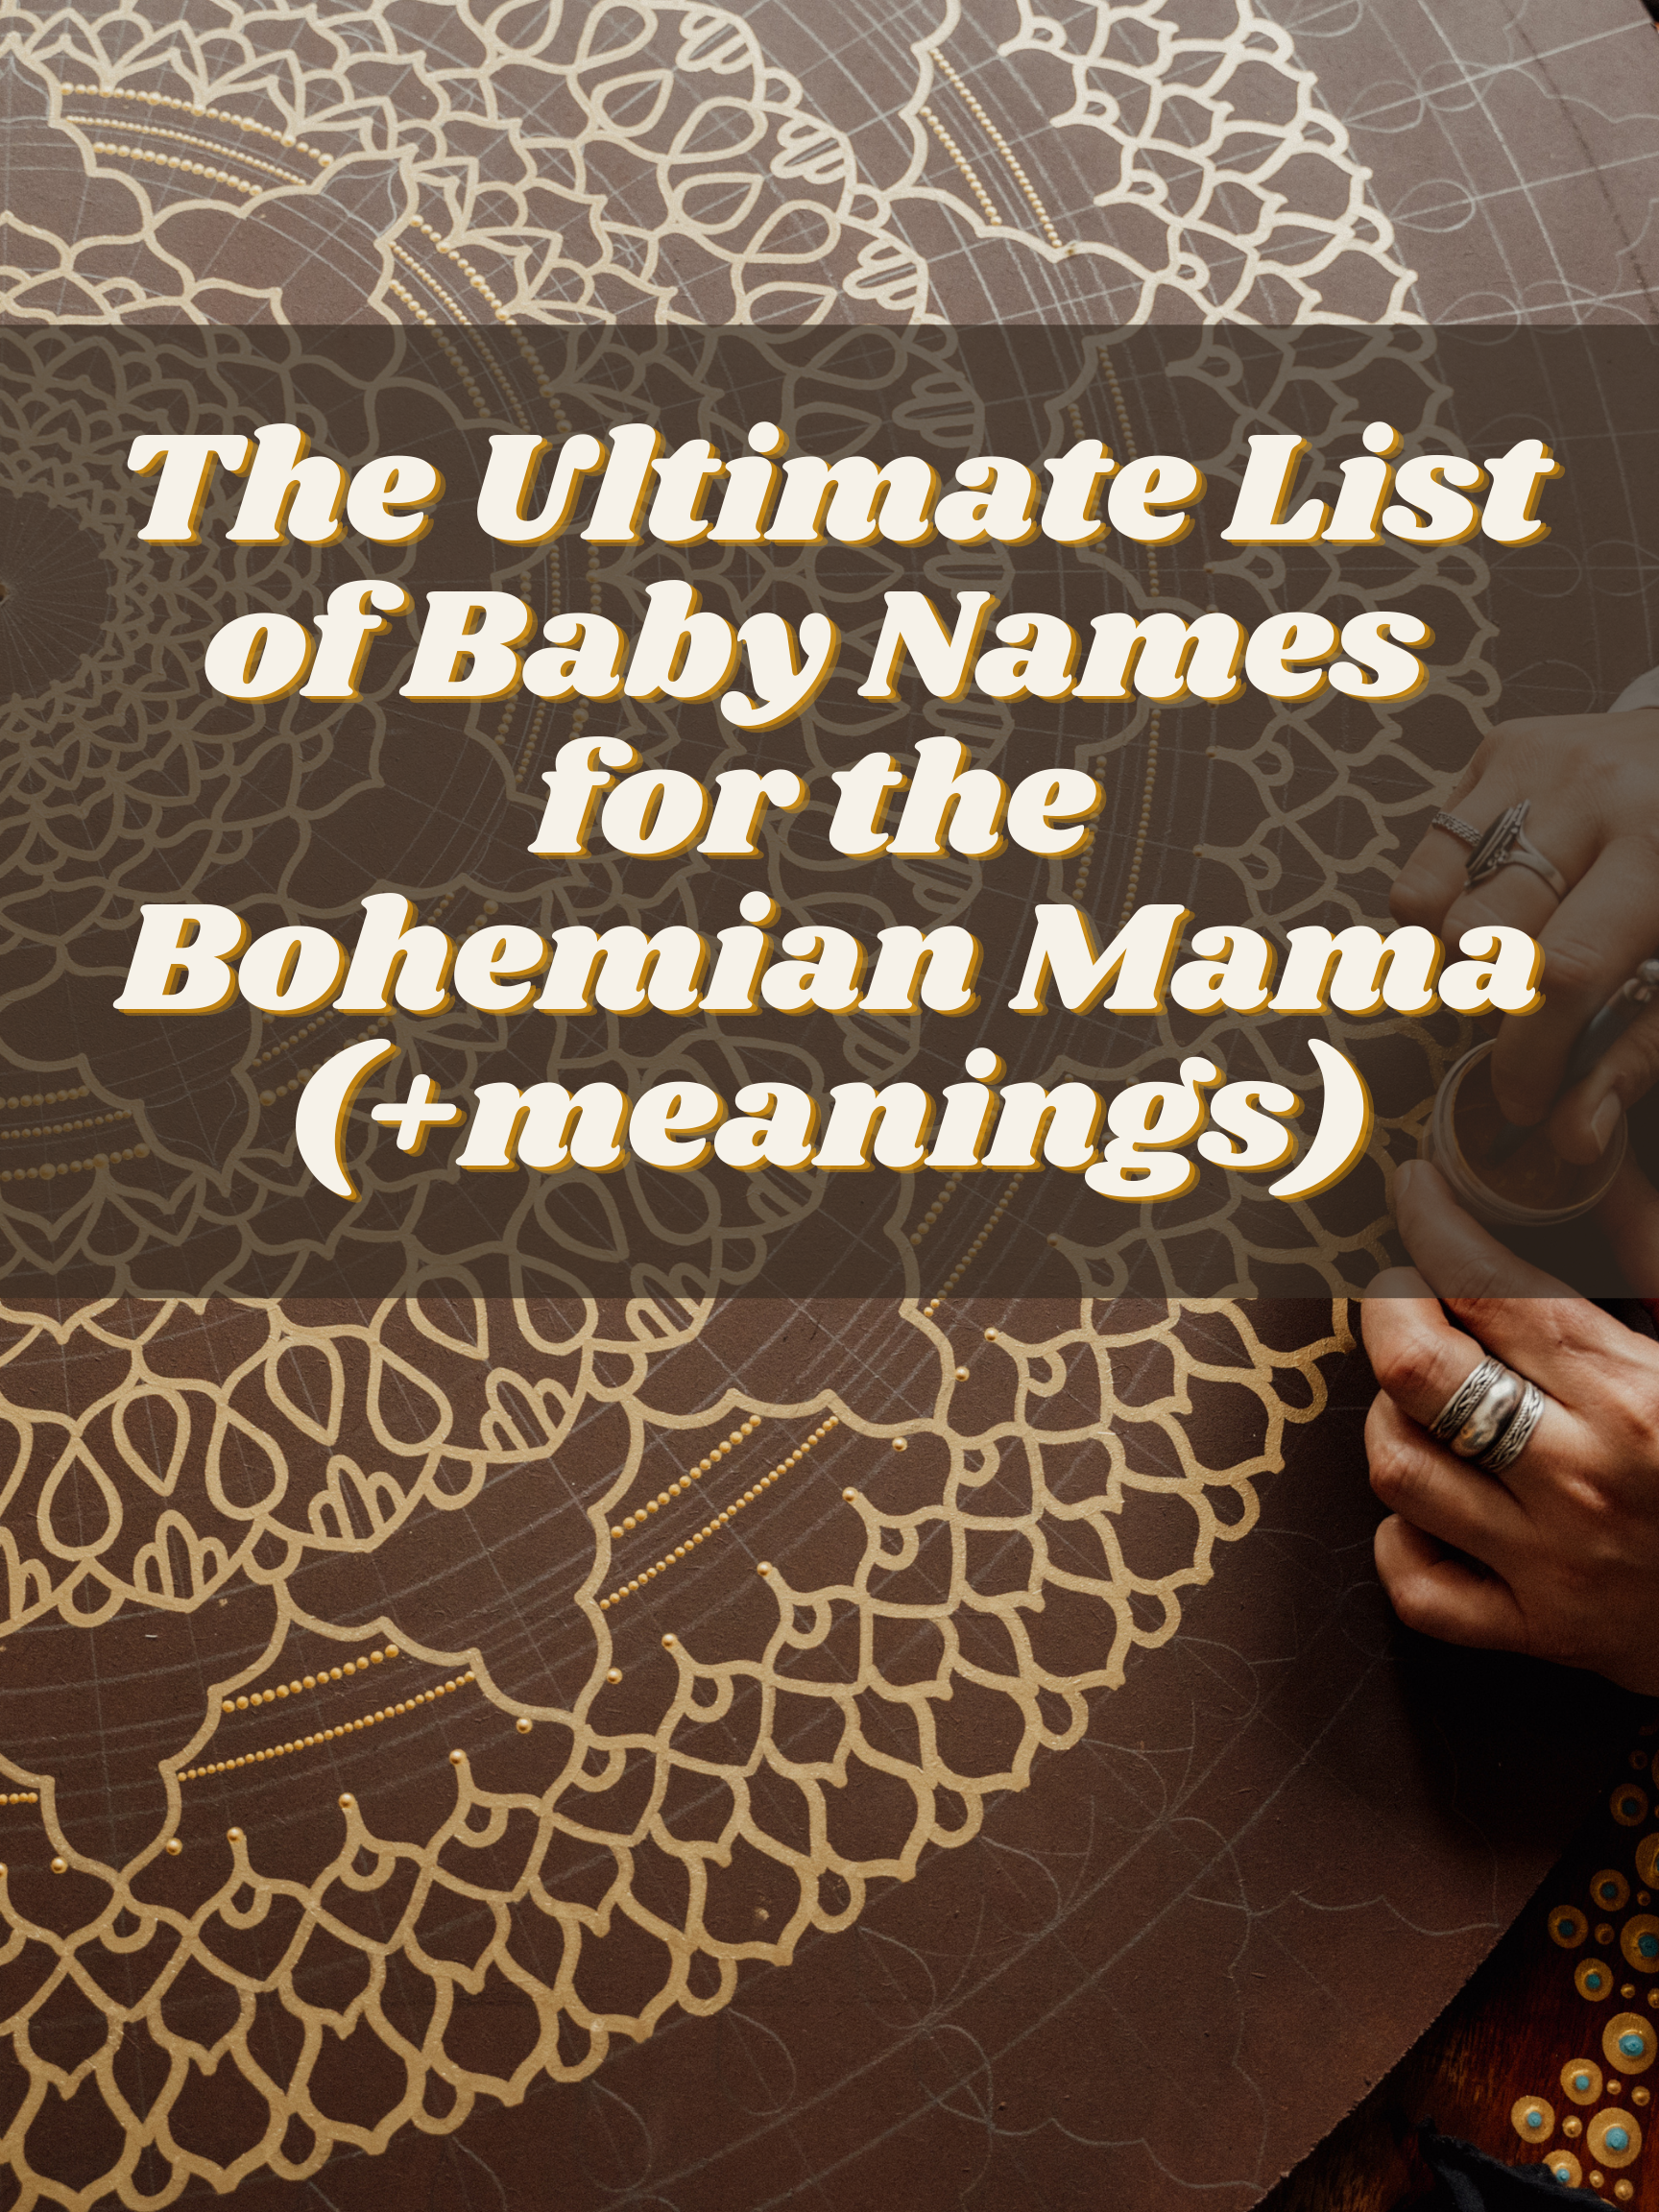 The Ultimate List of Baby Names for the Bohemian Mama (+ meanings)